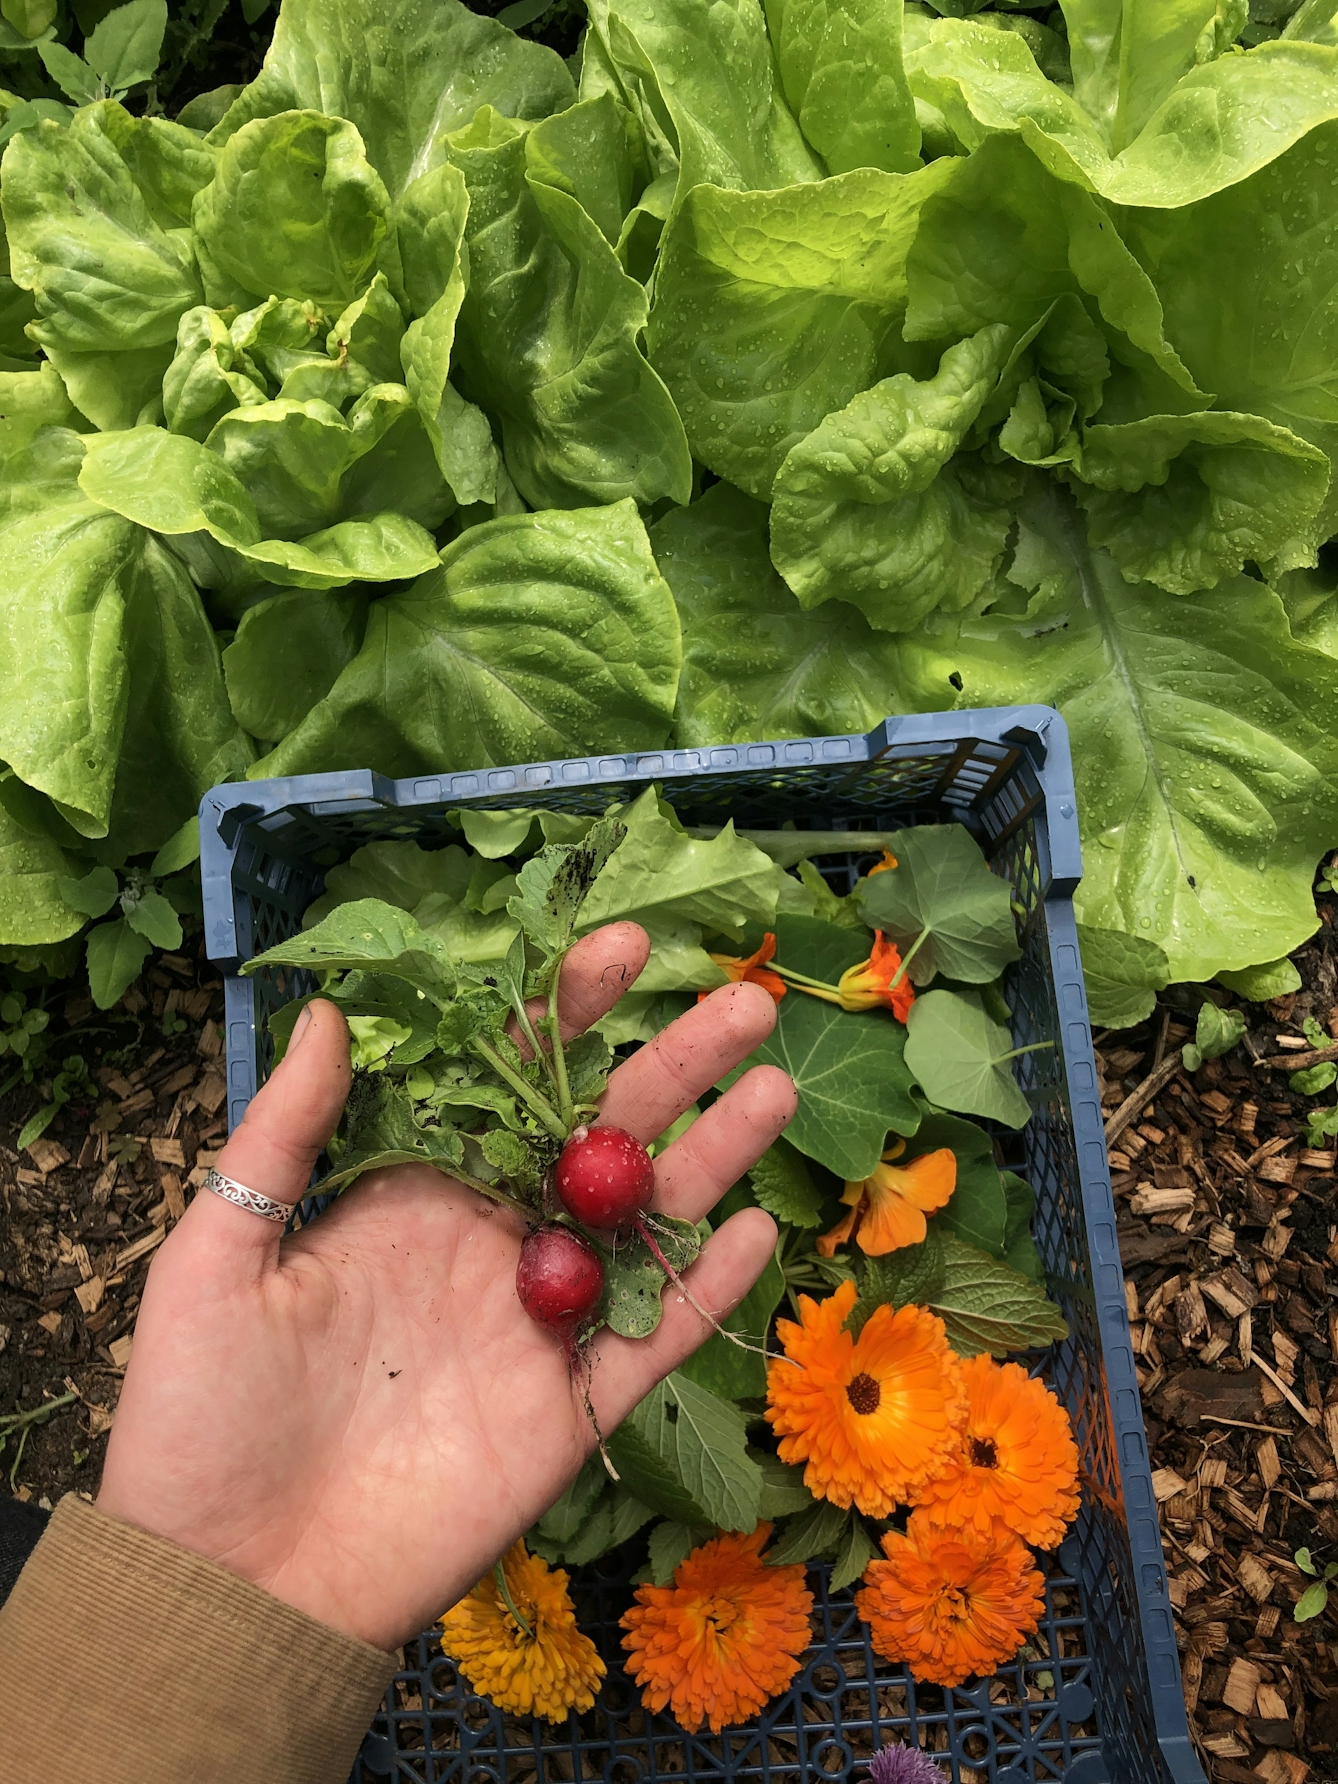 Colour photograph showing harvested radishes, nasturtiums and marigolds, with lettuces growing in the background. The flowers are in a crate; the radishes are resting in someone's open hand. The rest of the person is not in view.